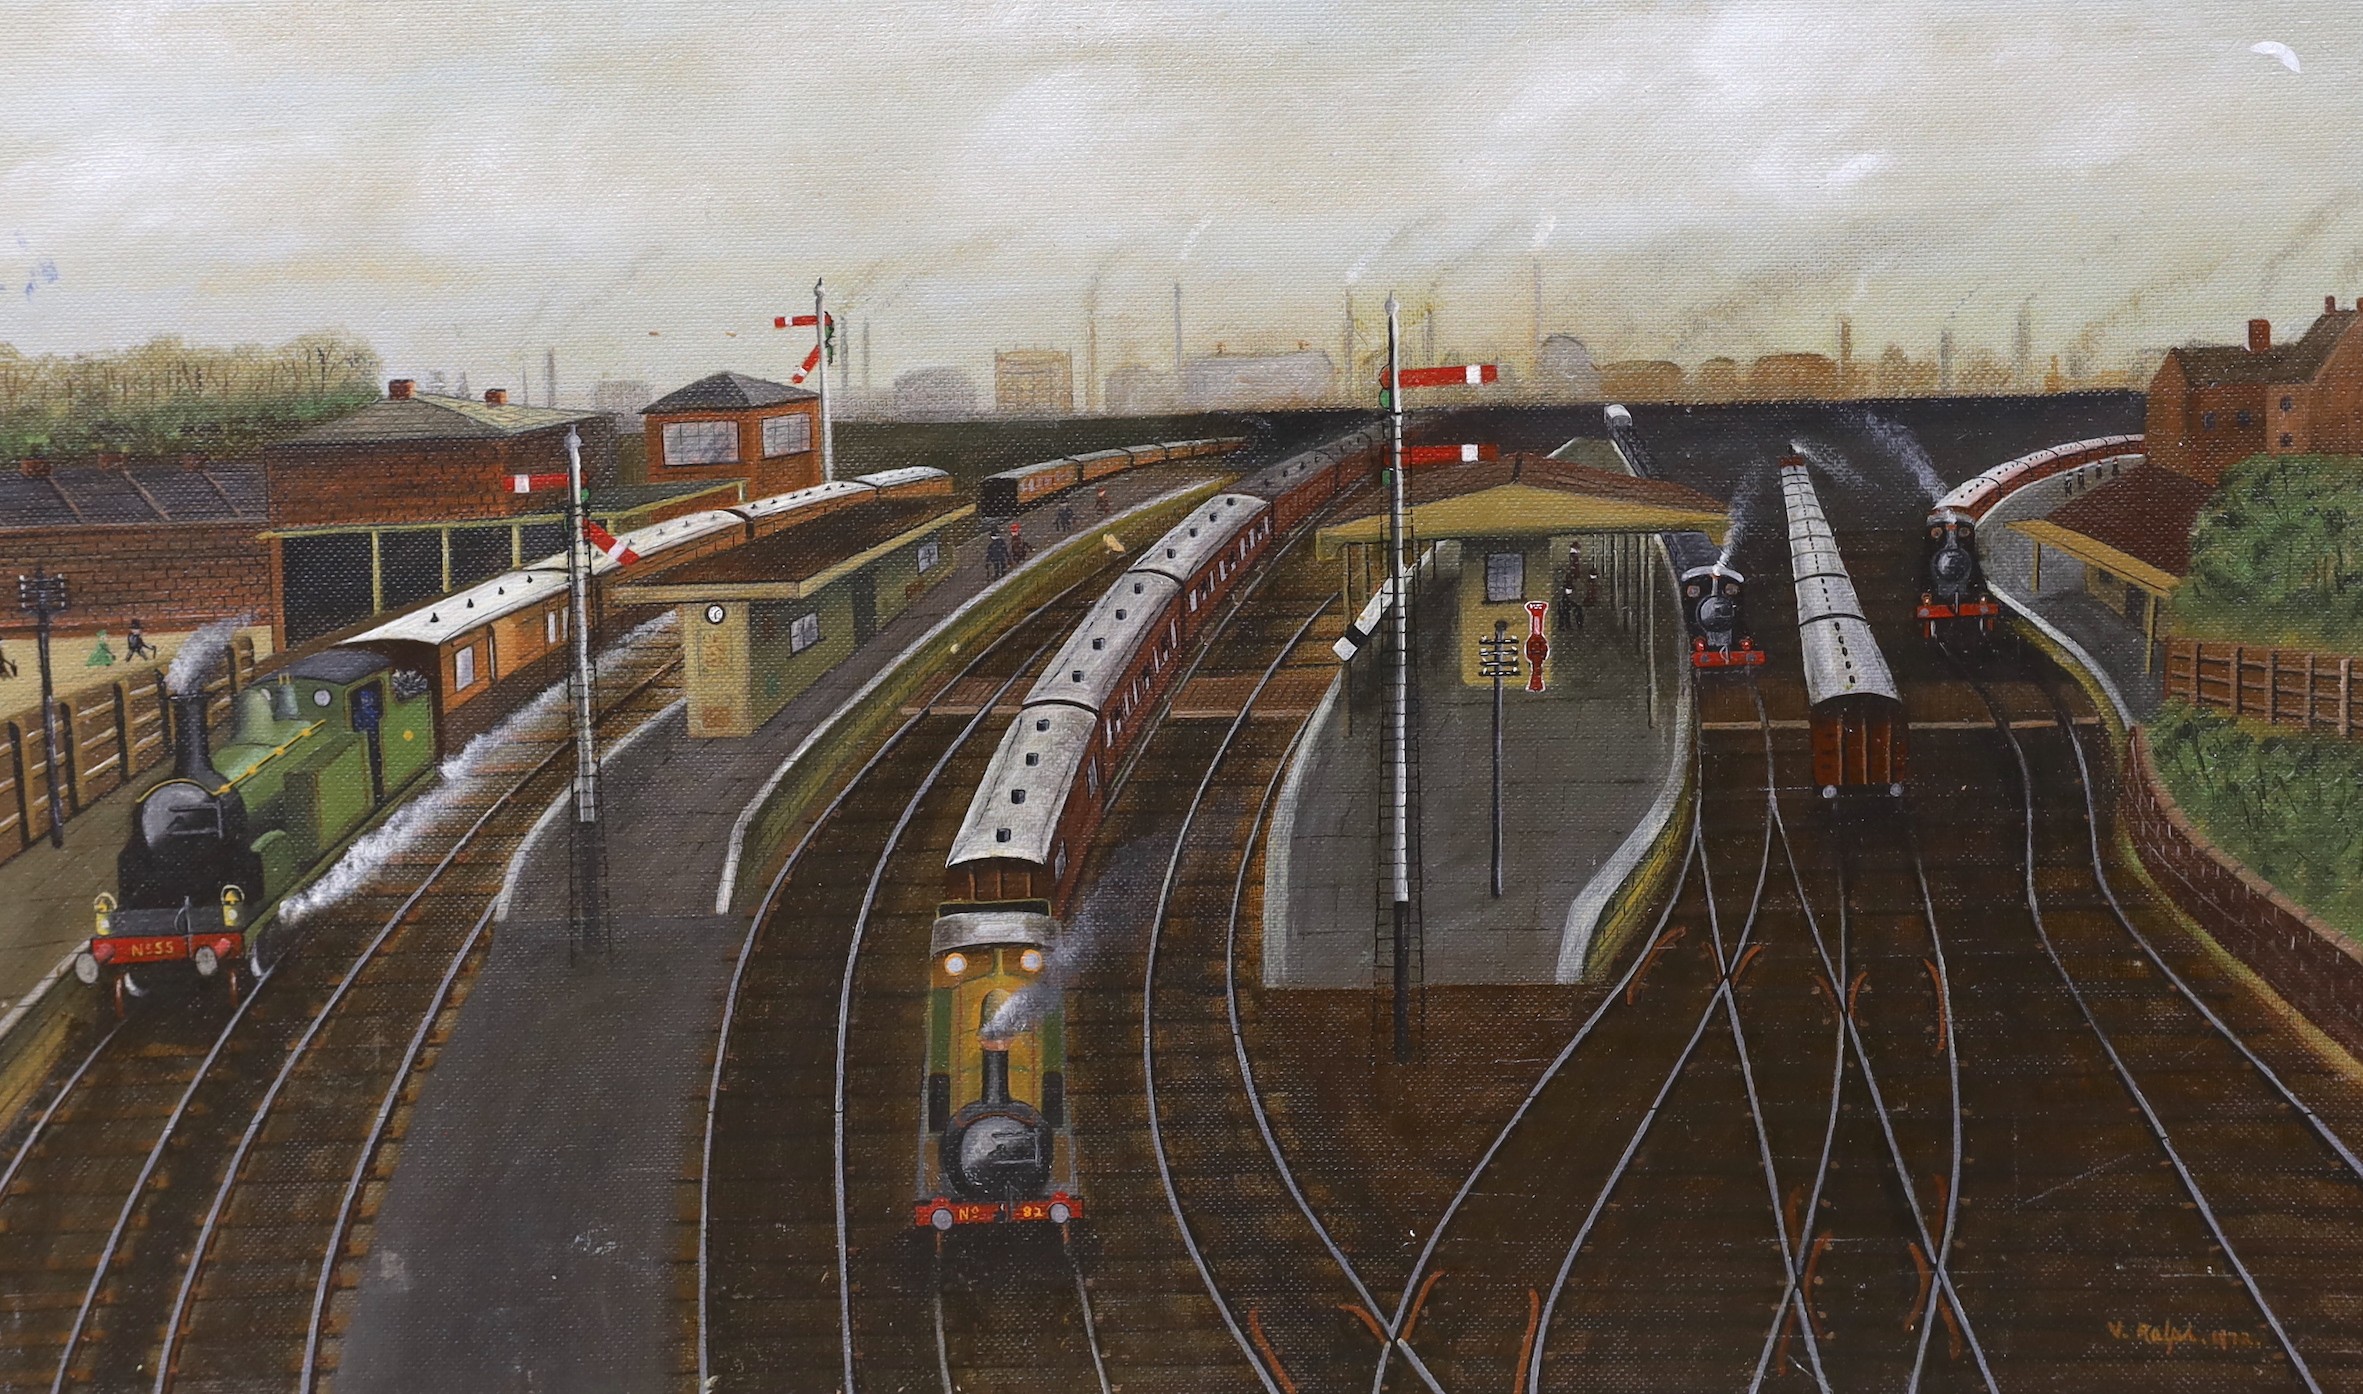 V. Ralph, oil on board, Clapham Junction c.1880, signed and dated 1972 and inscribed verso, 46 x 76cm, unframed